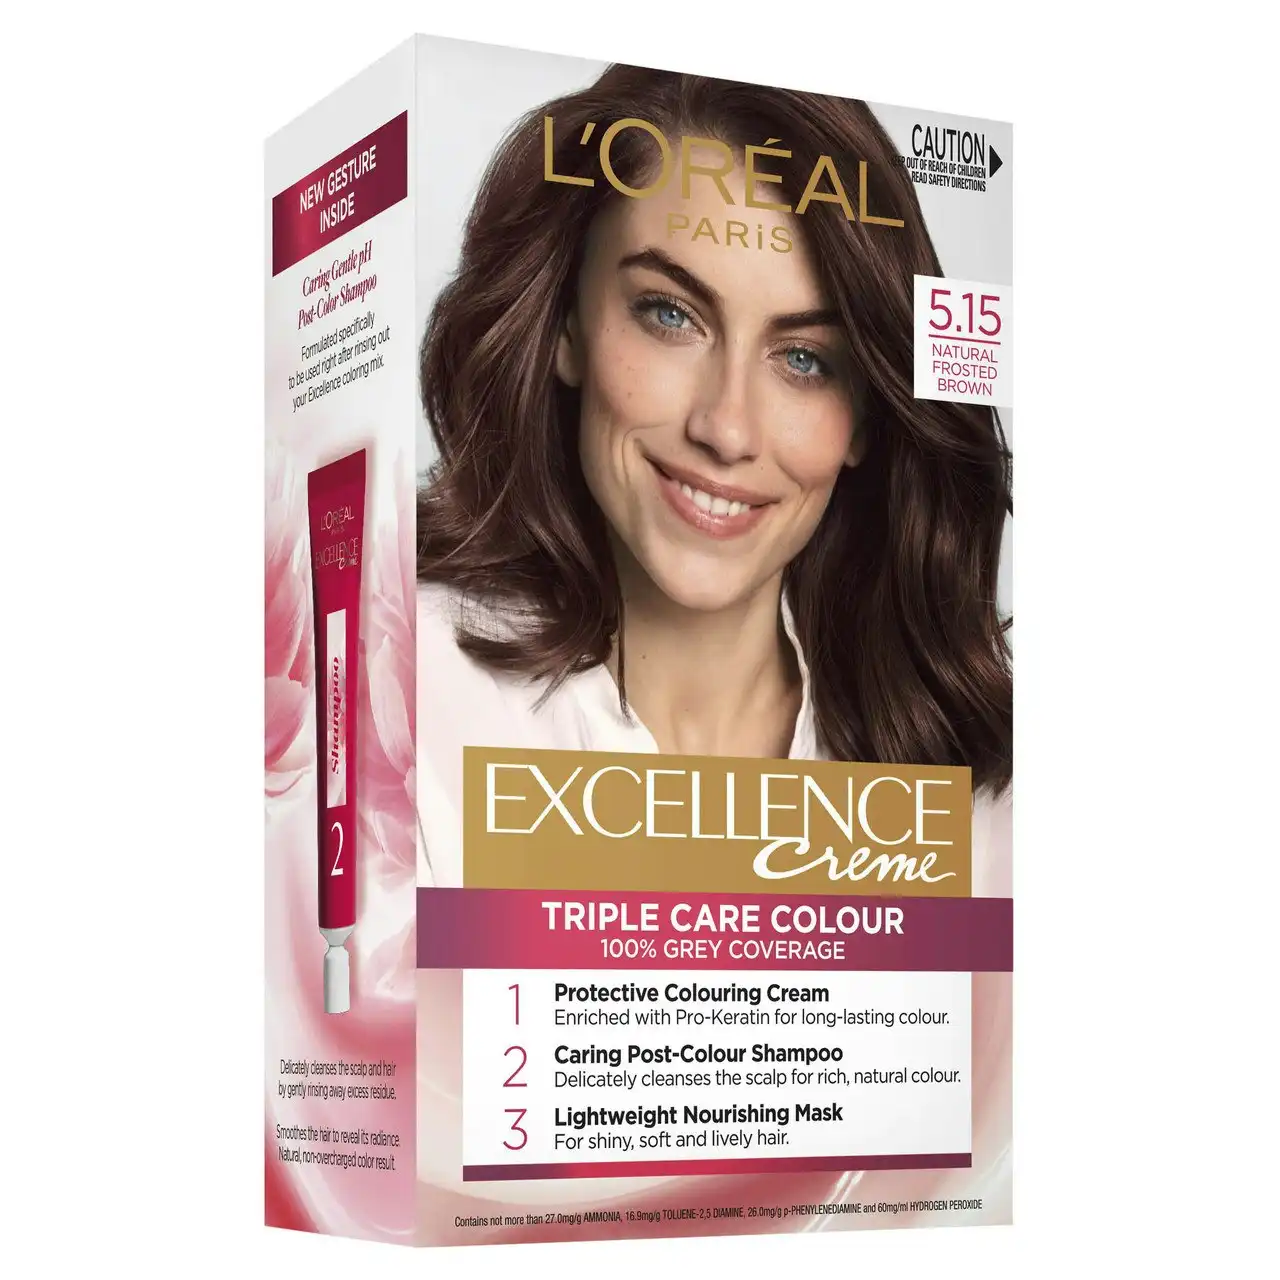 L'Oreal Paris Excellence Creme Permanent Hair Colour - 5.15 Natural Frosted Brown